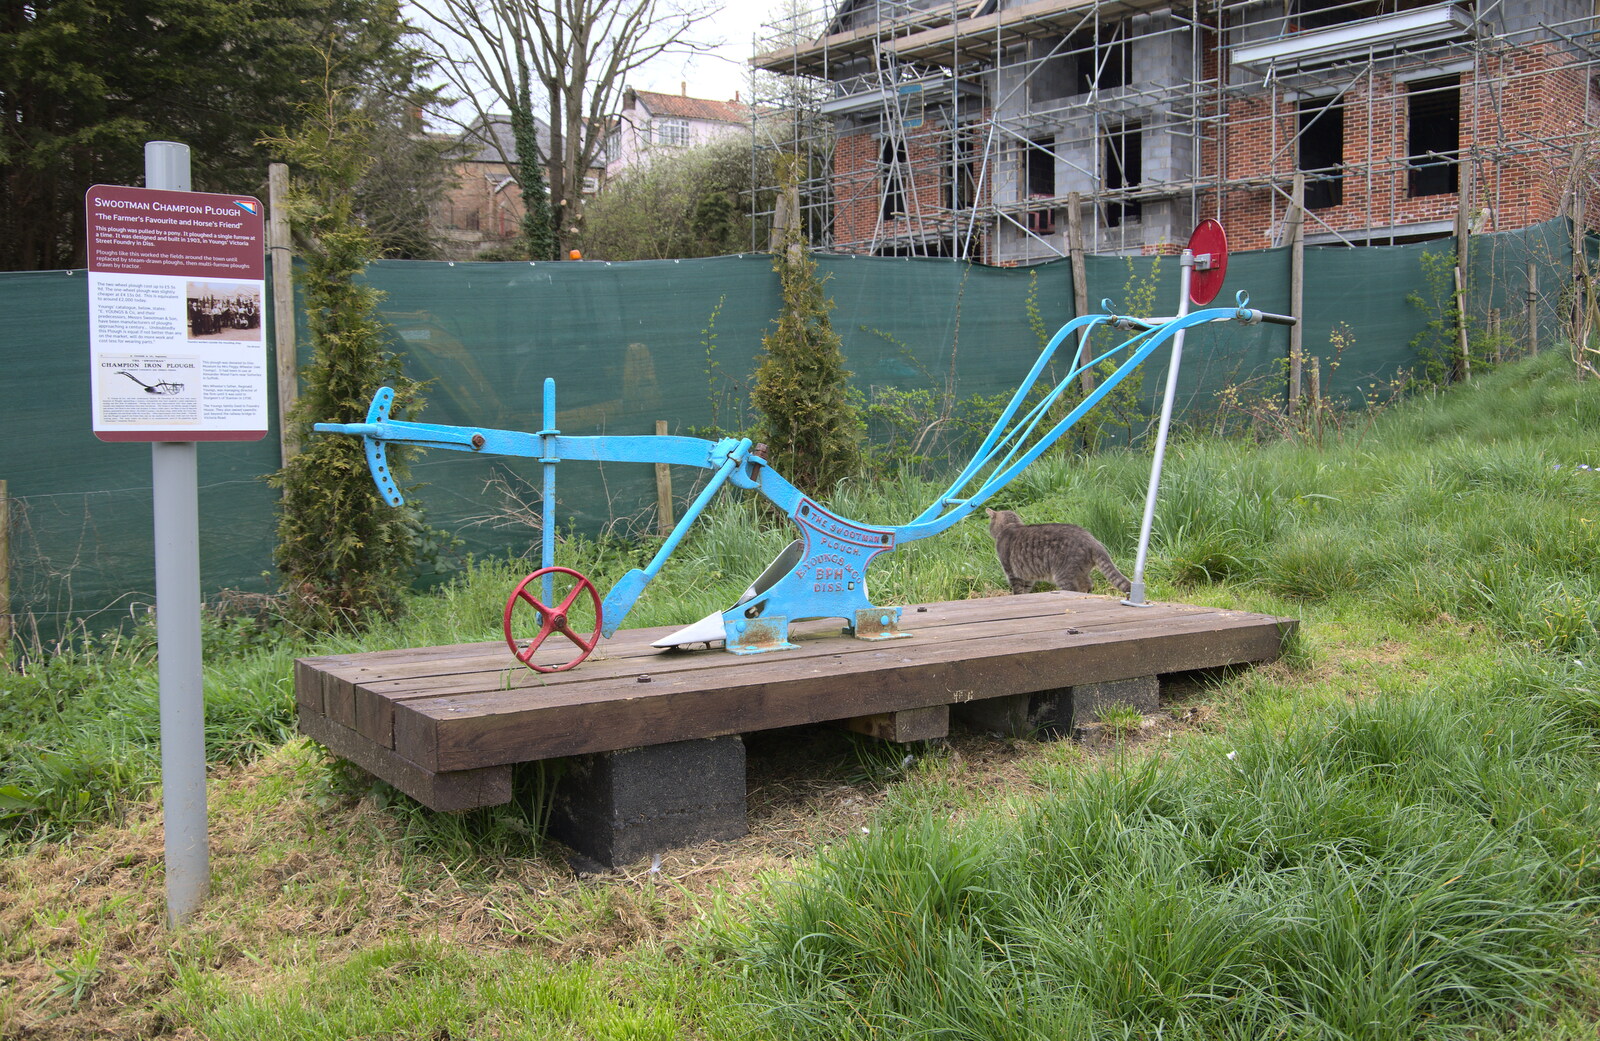 A Trip Down South, New Milton, Hampshire - 9th April 2022: A Swootman Champion Plough, made in Diss